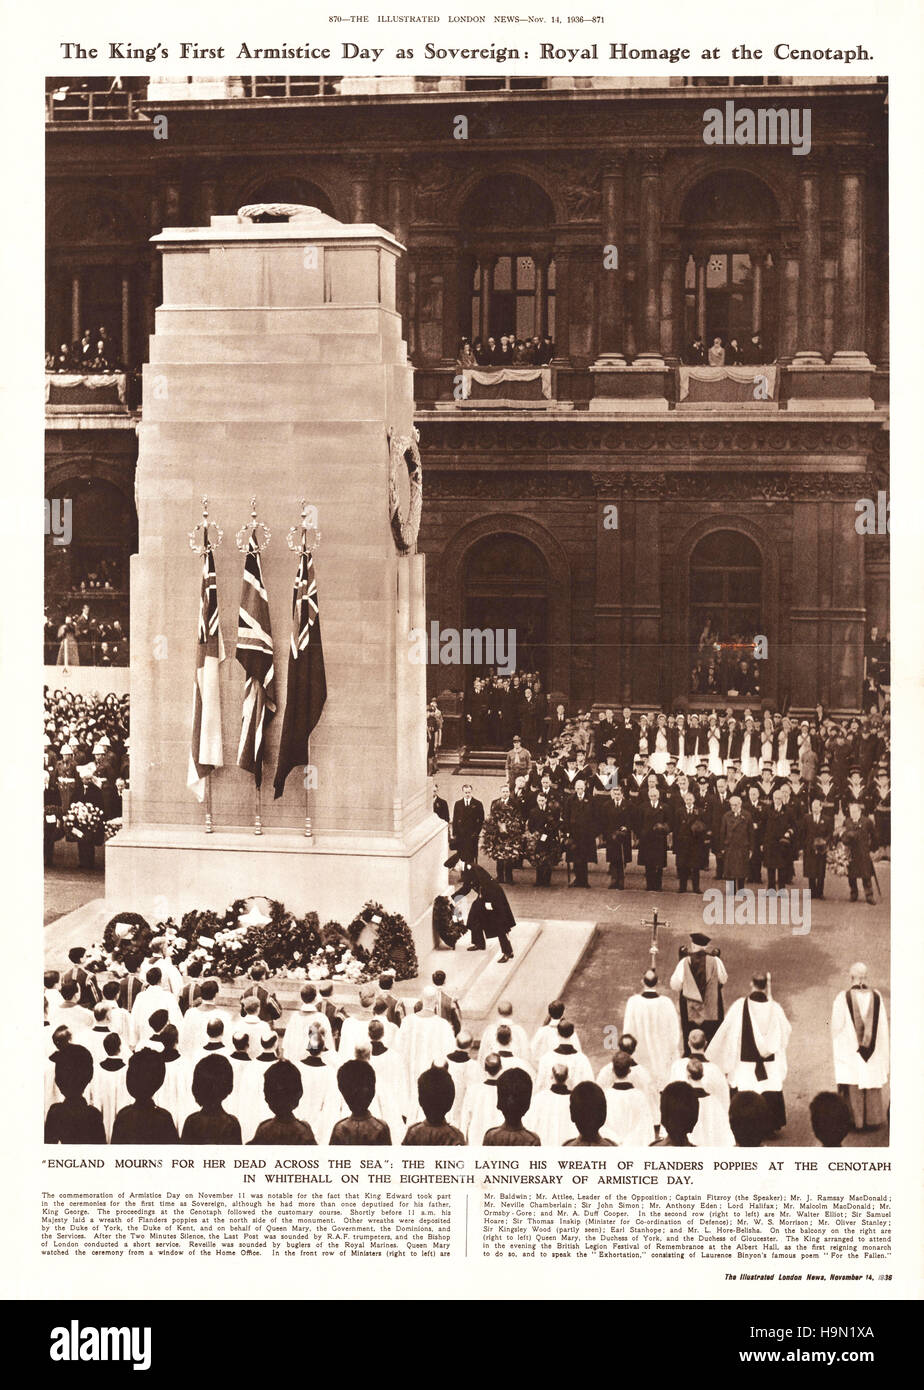 1936 Illustrated London News page 870-871 King Edward VIII lays wreath at Cenotaph Stock Photo